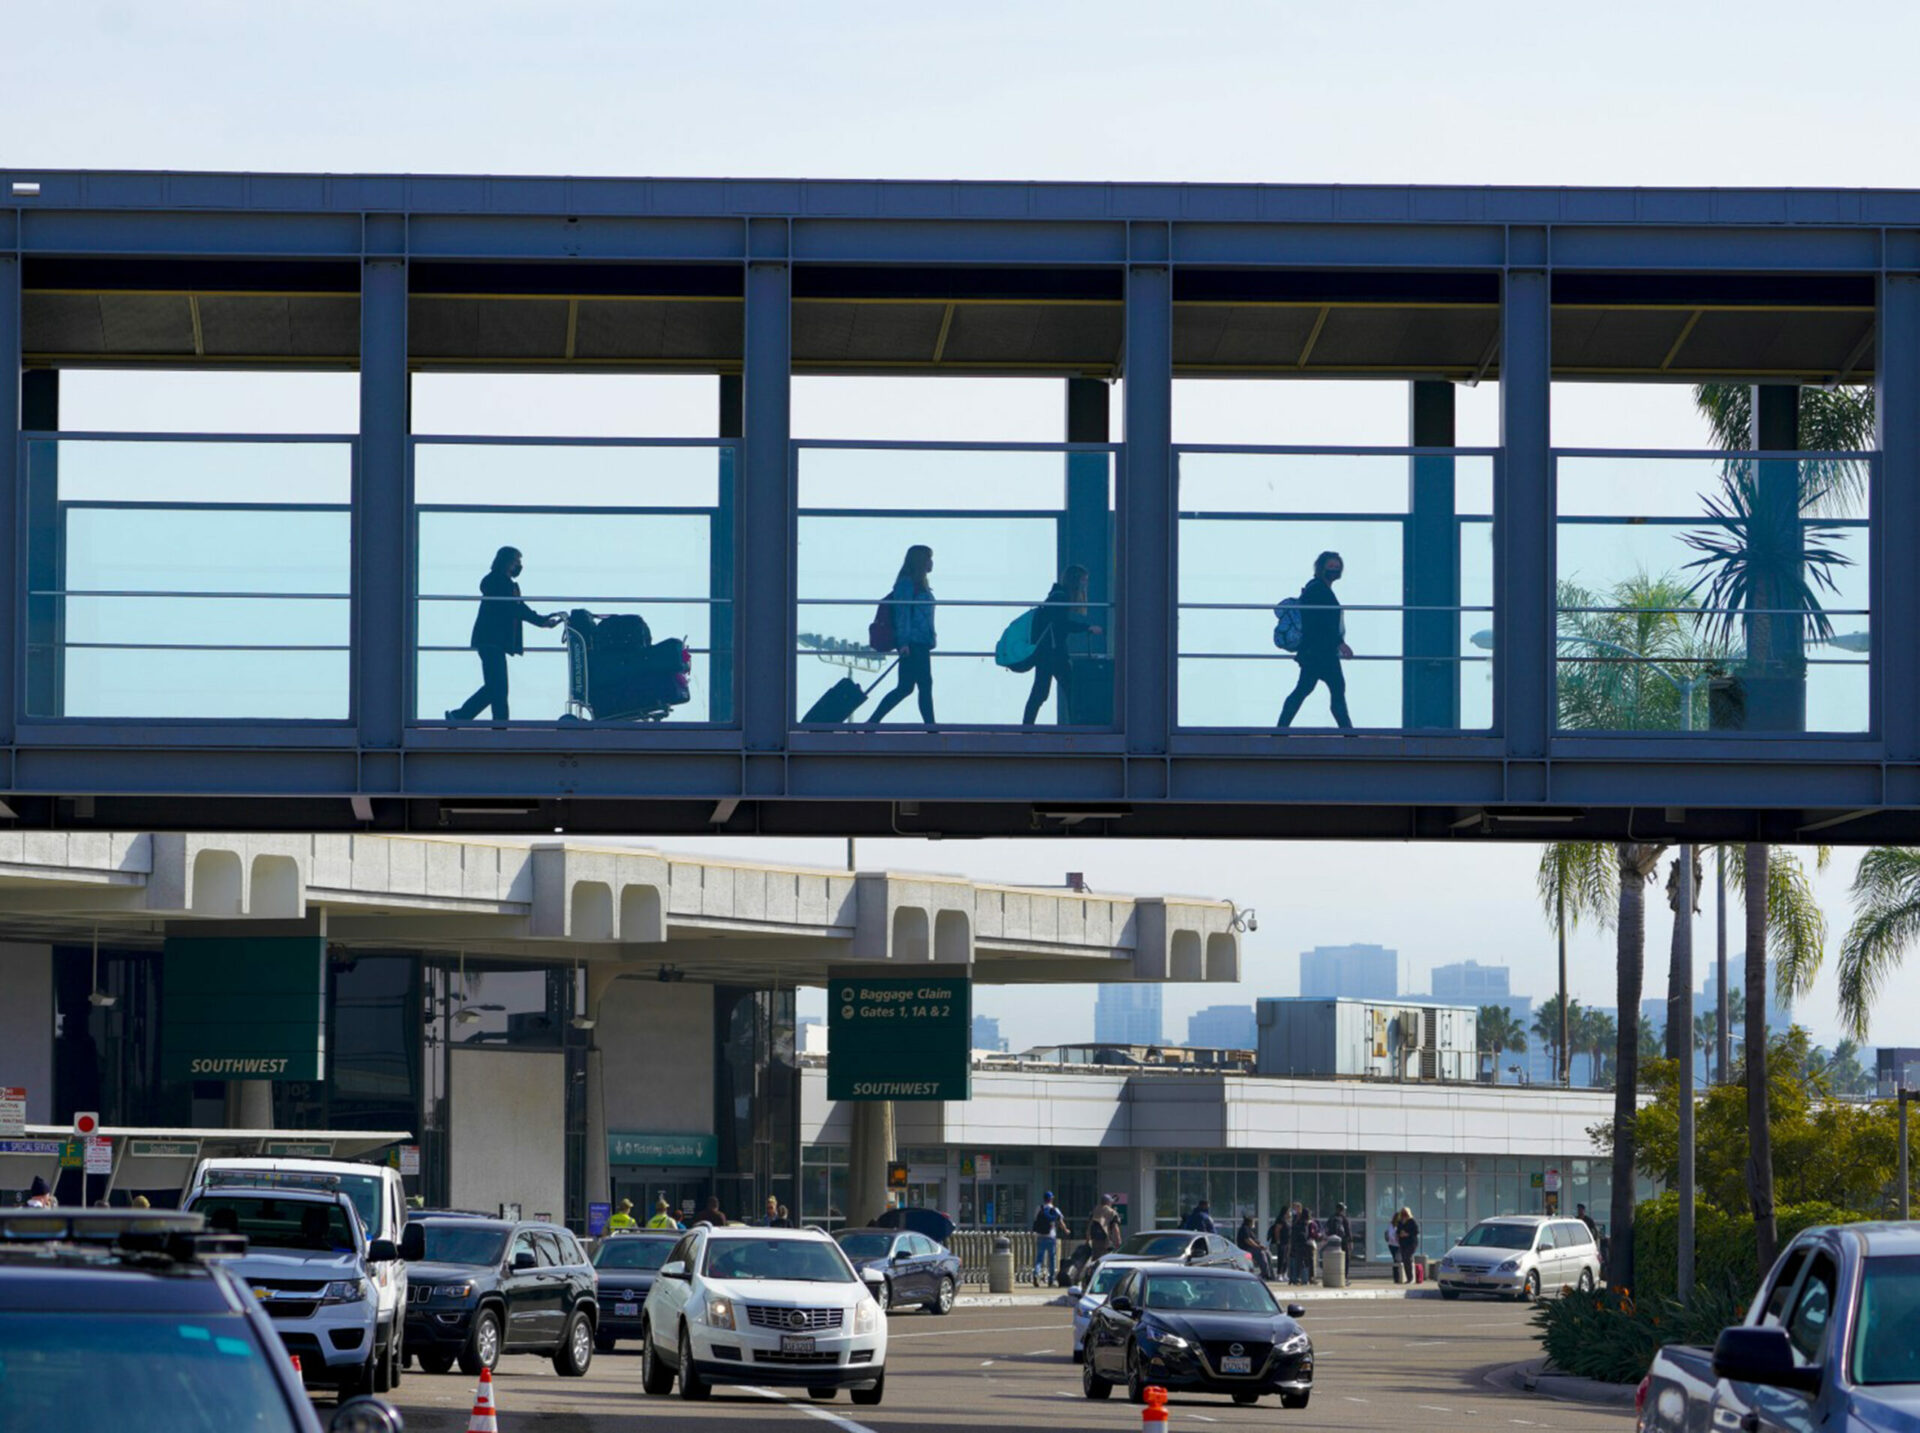 Operations resume at San Diego Int’l Airport after man breaches security, flights grounded